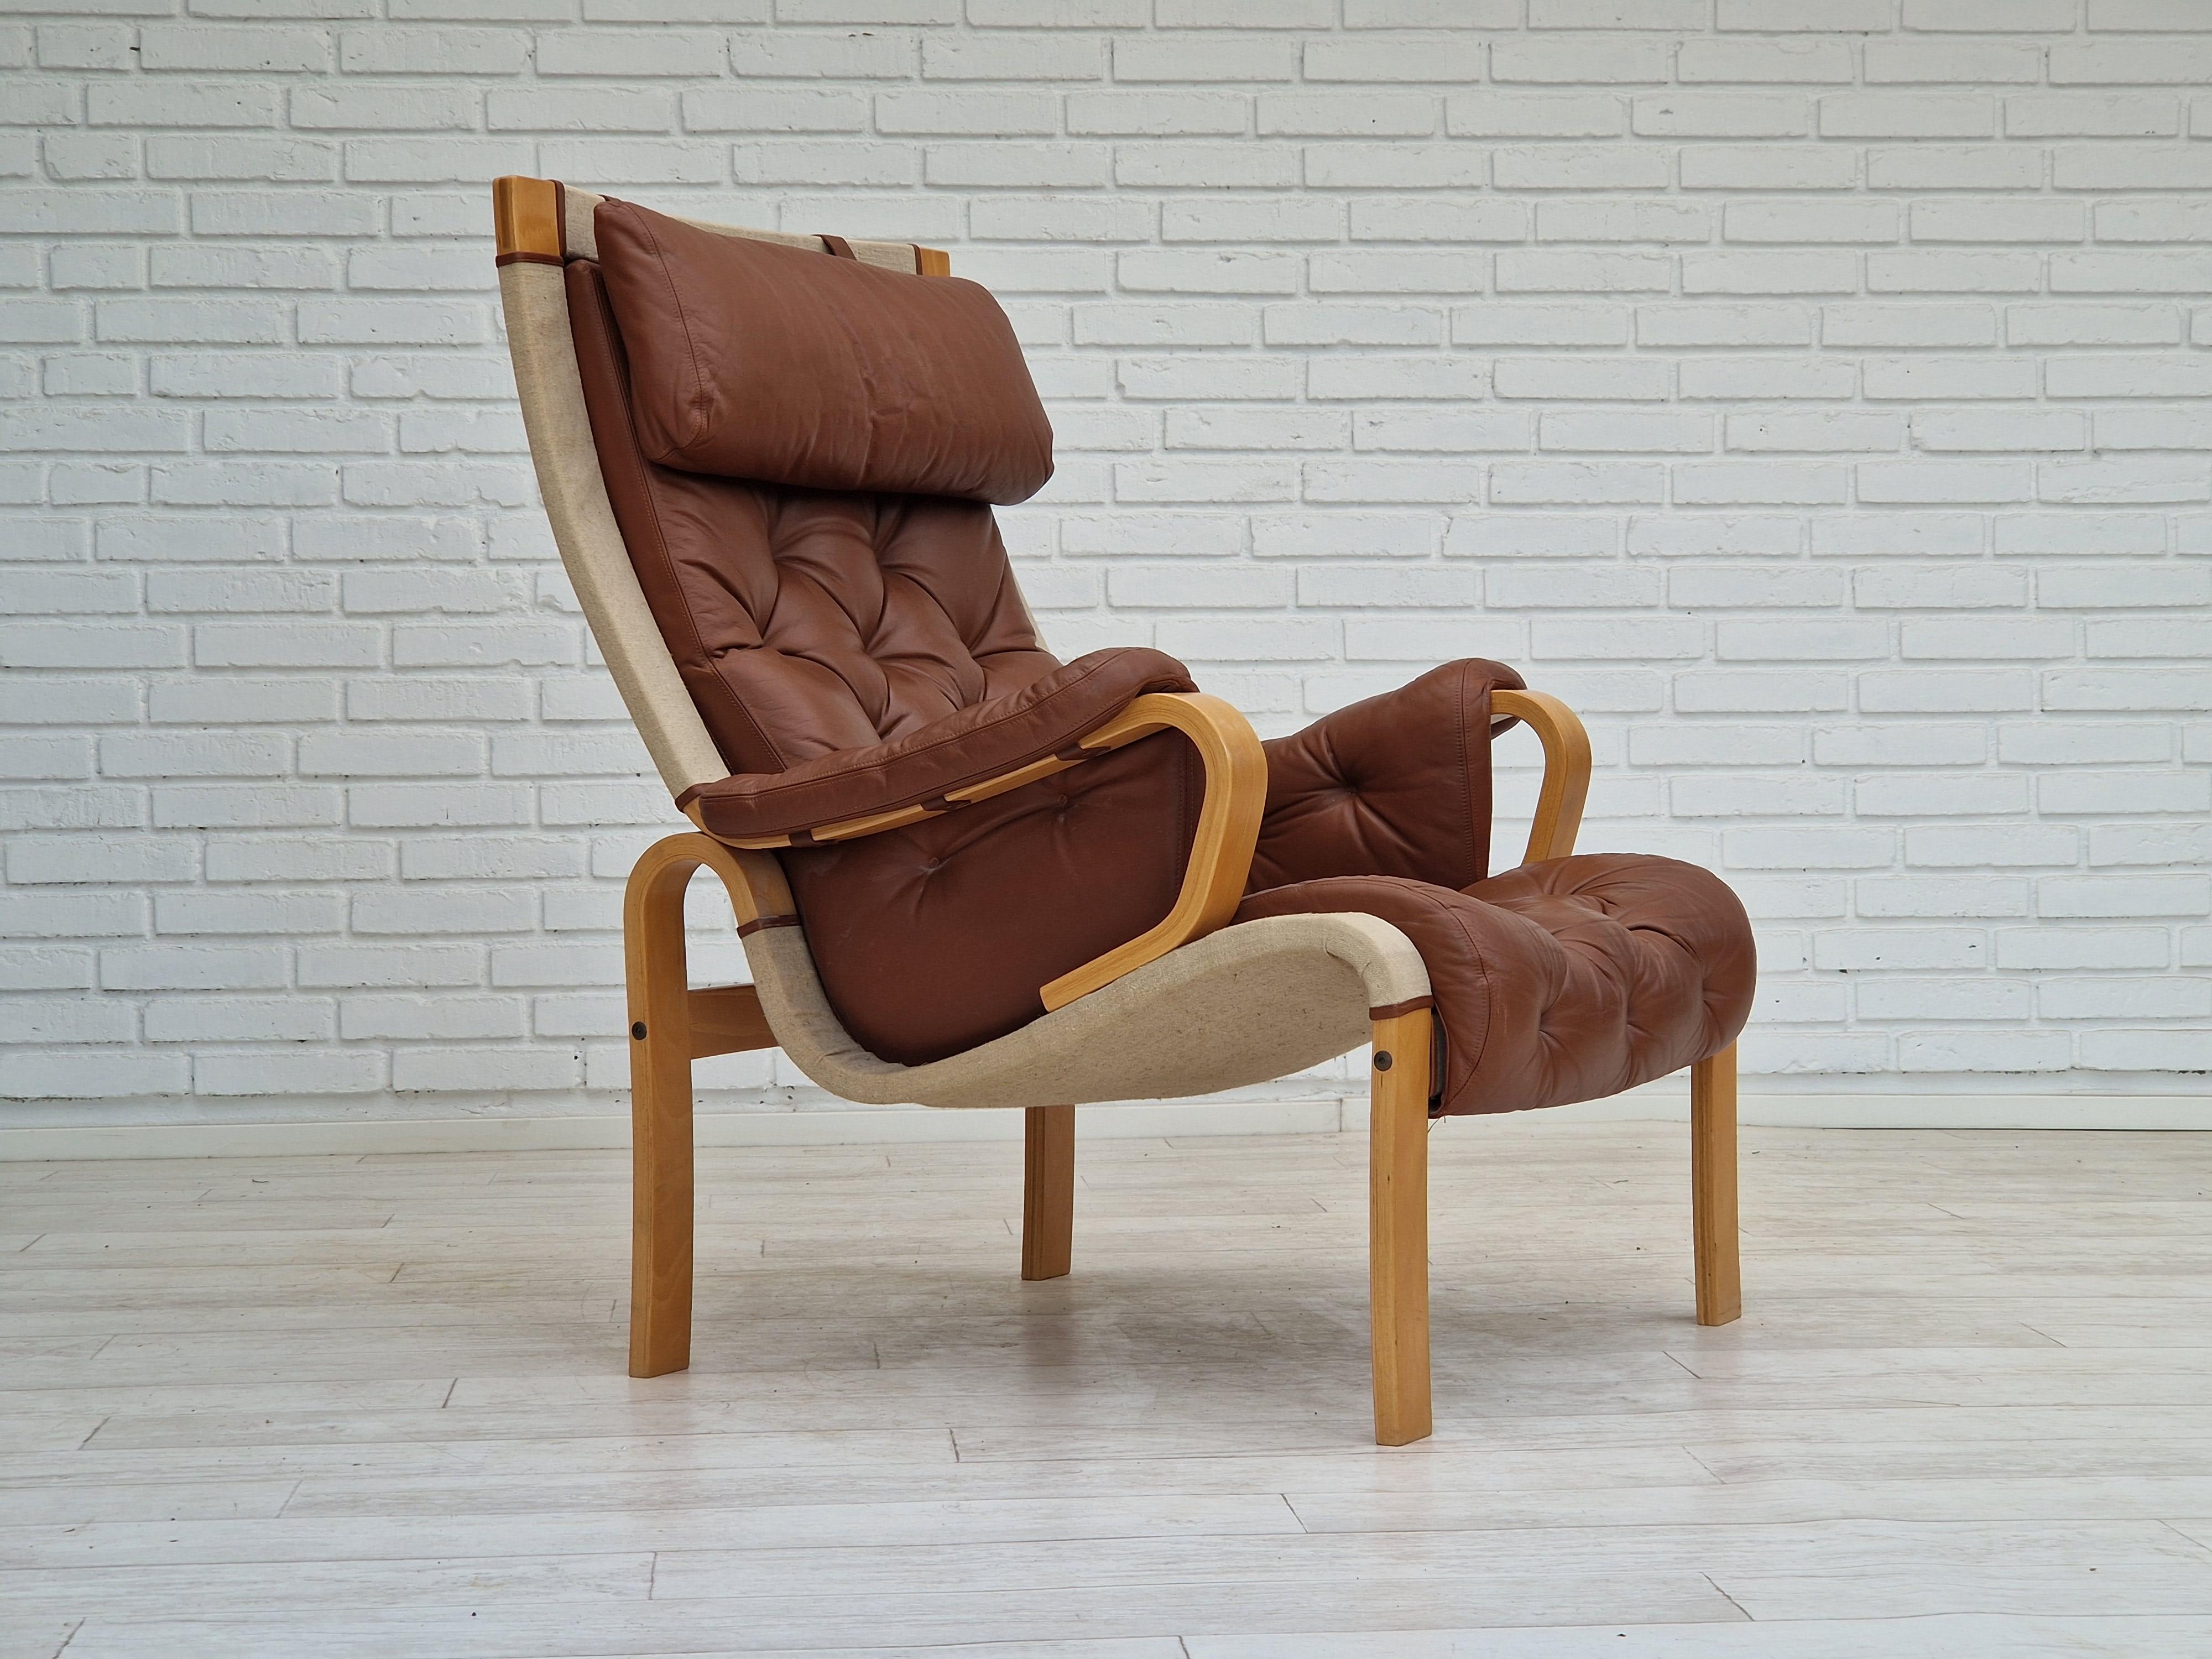 1970-80s, Danish design by Jeki Møbler. Armchair in camel-brun leather, beech bent wood. Original very good condition: no smells and no stains. Loose cushions.